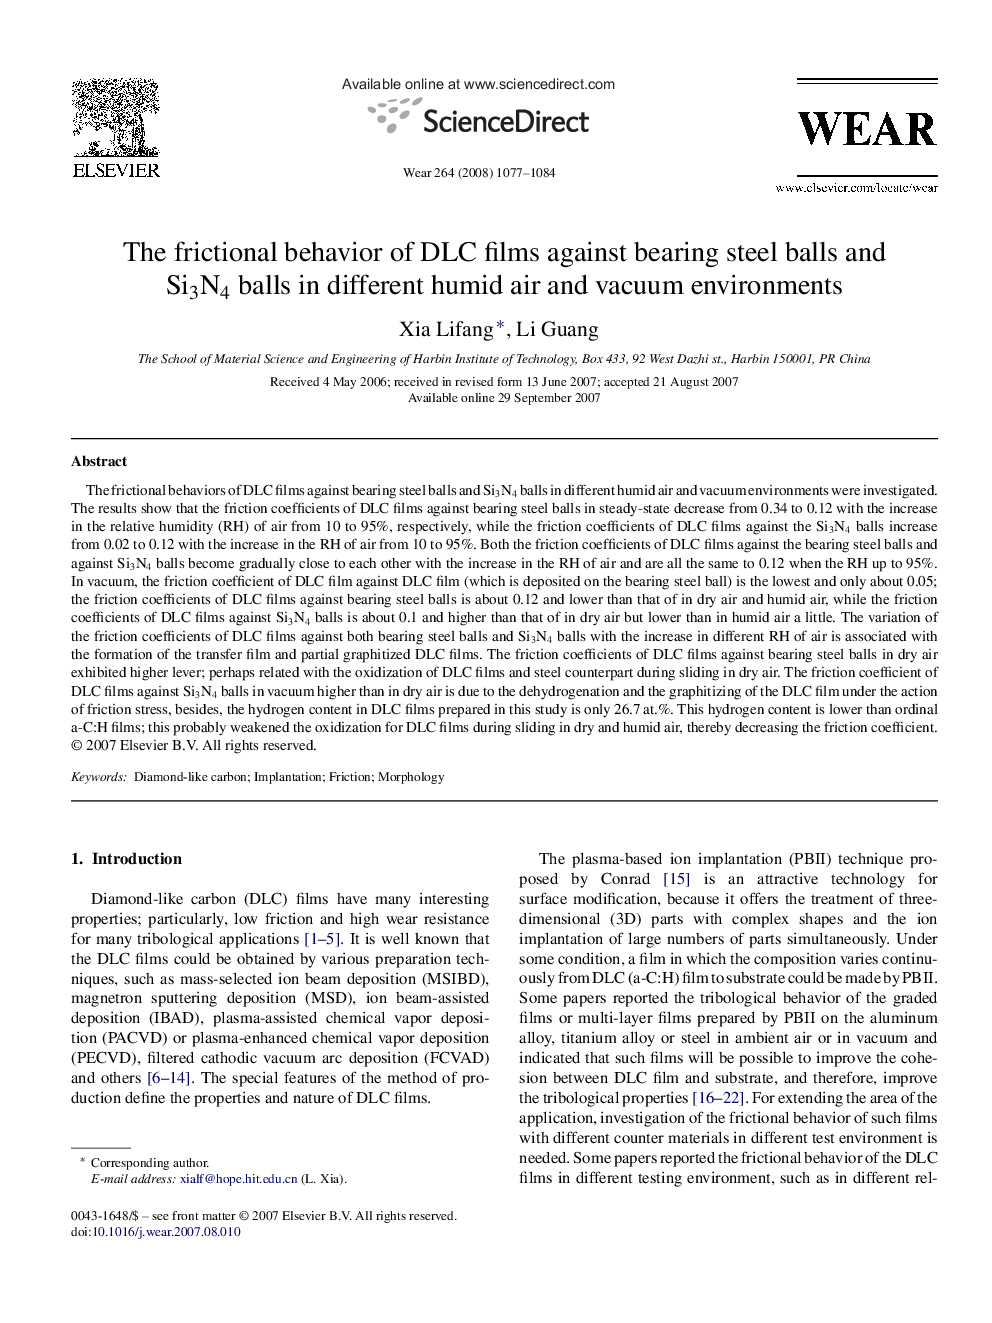 The frictional behavior of DLC films against bearing steel balls and Si3N4 balls in different humid air and vacuum environments